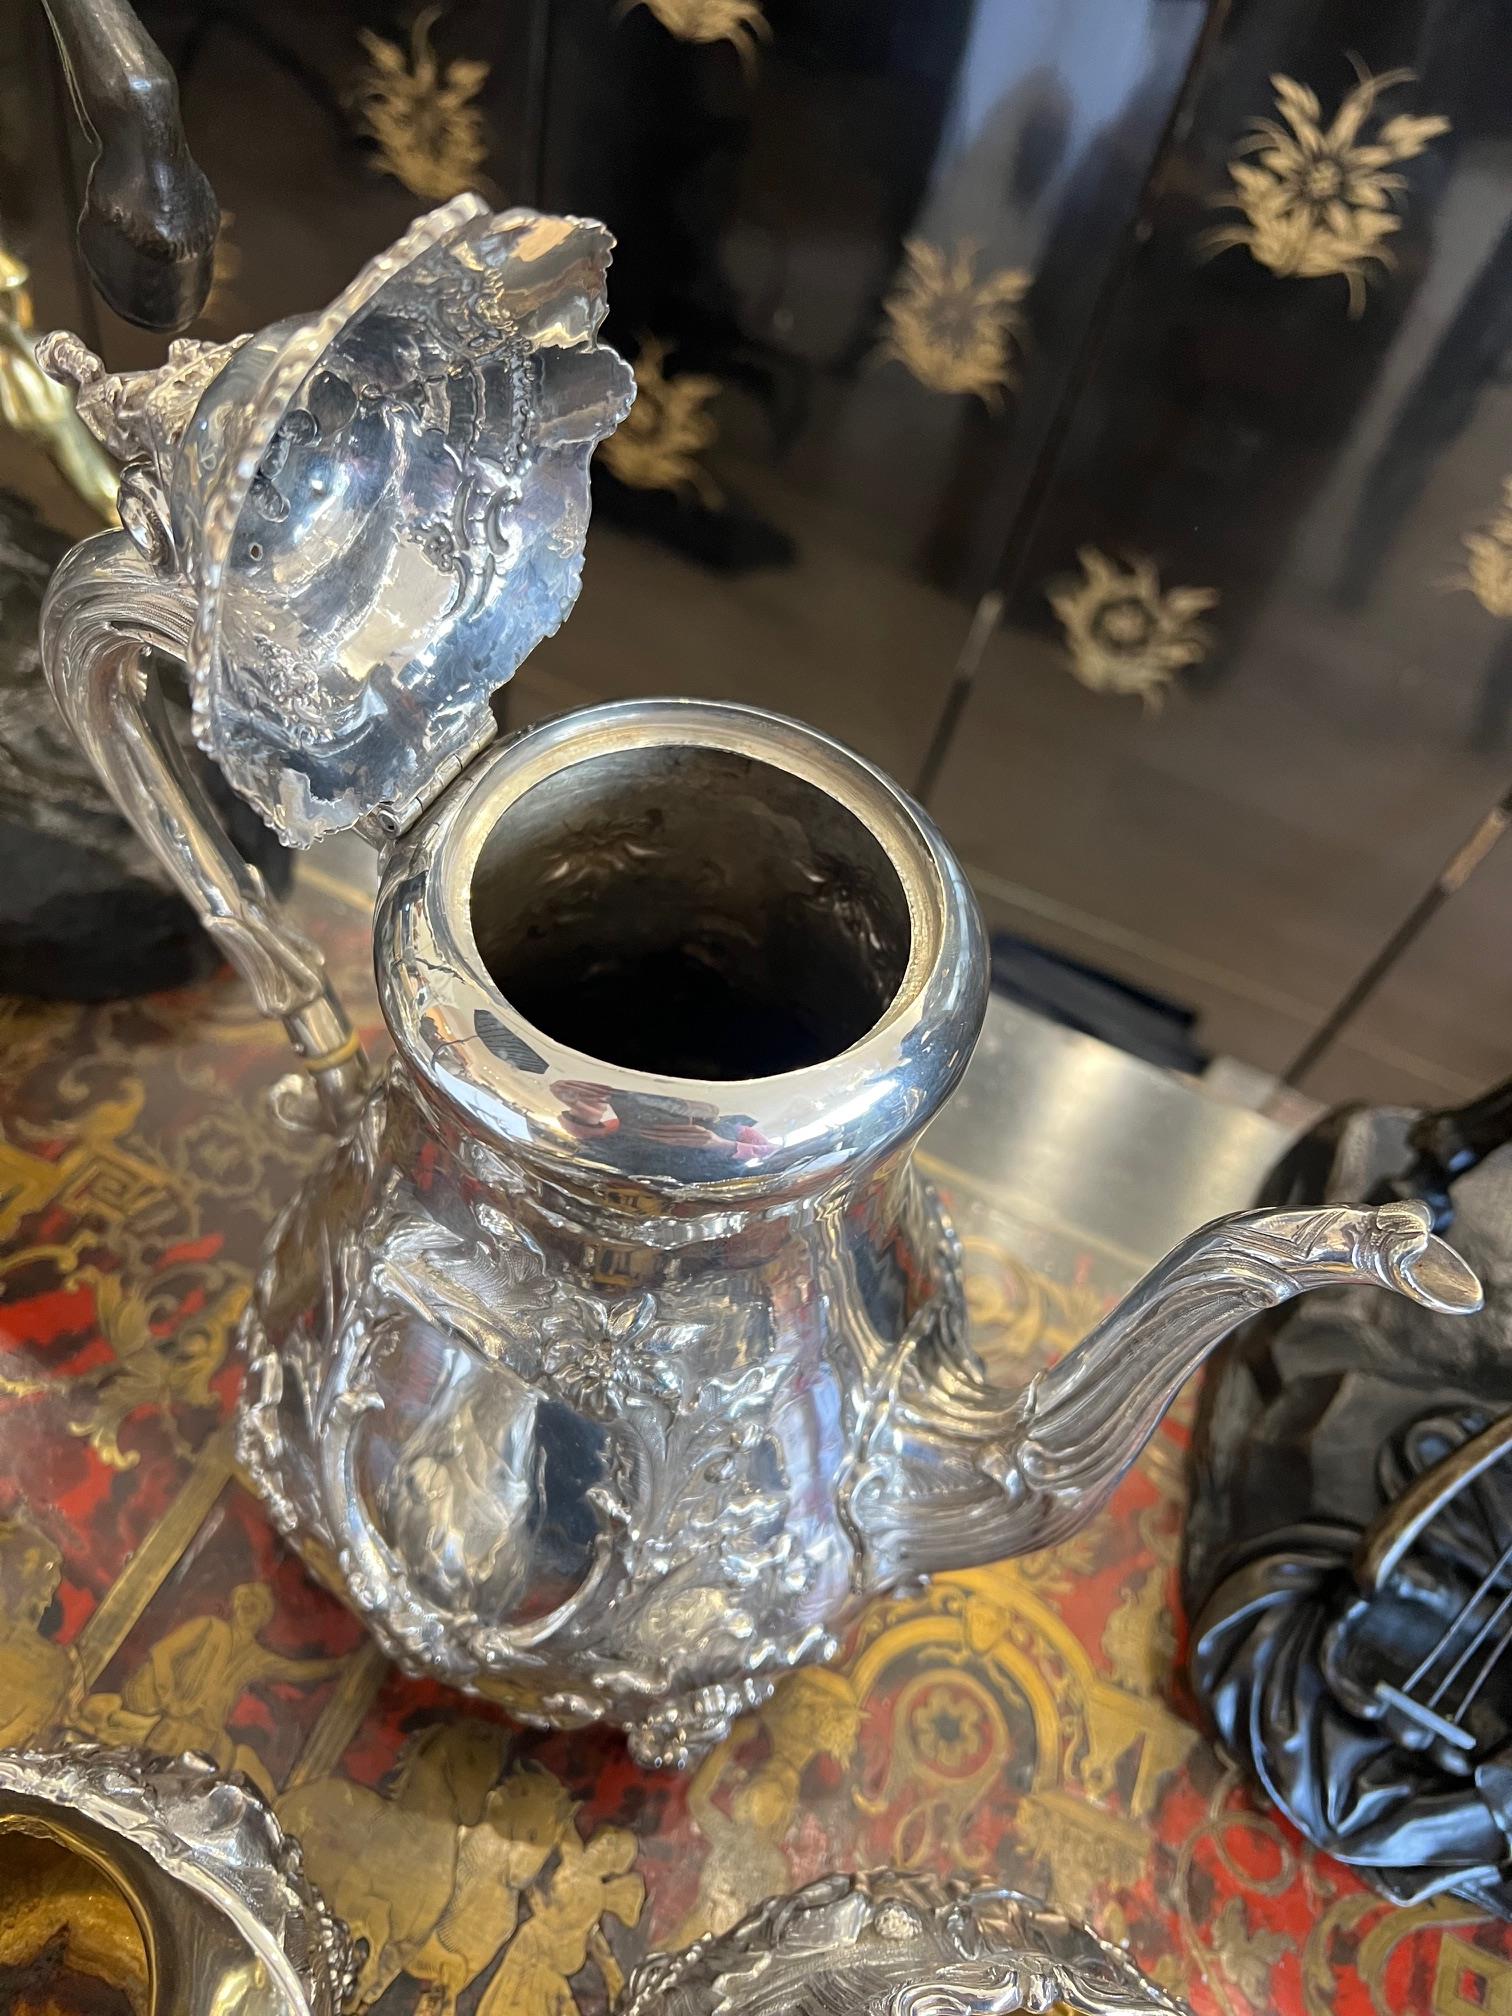 A RARE 19TH CENTURY SILVER TEA AND COFFEE SET WITH SCENES OF TEA AND COFFEE PRODUCTION - Image 17 of 17